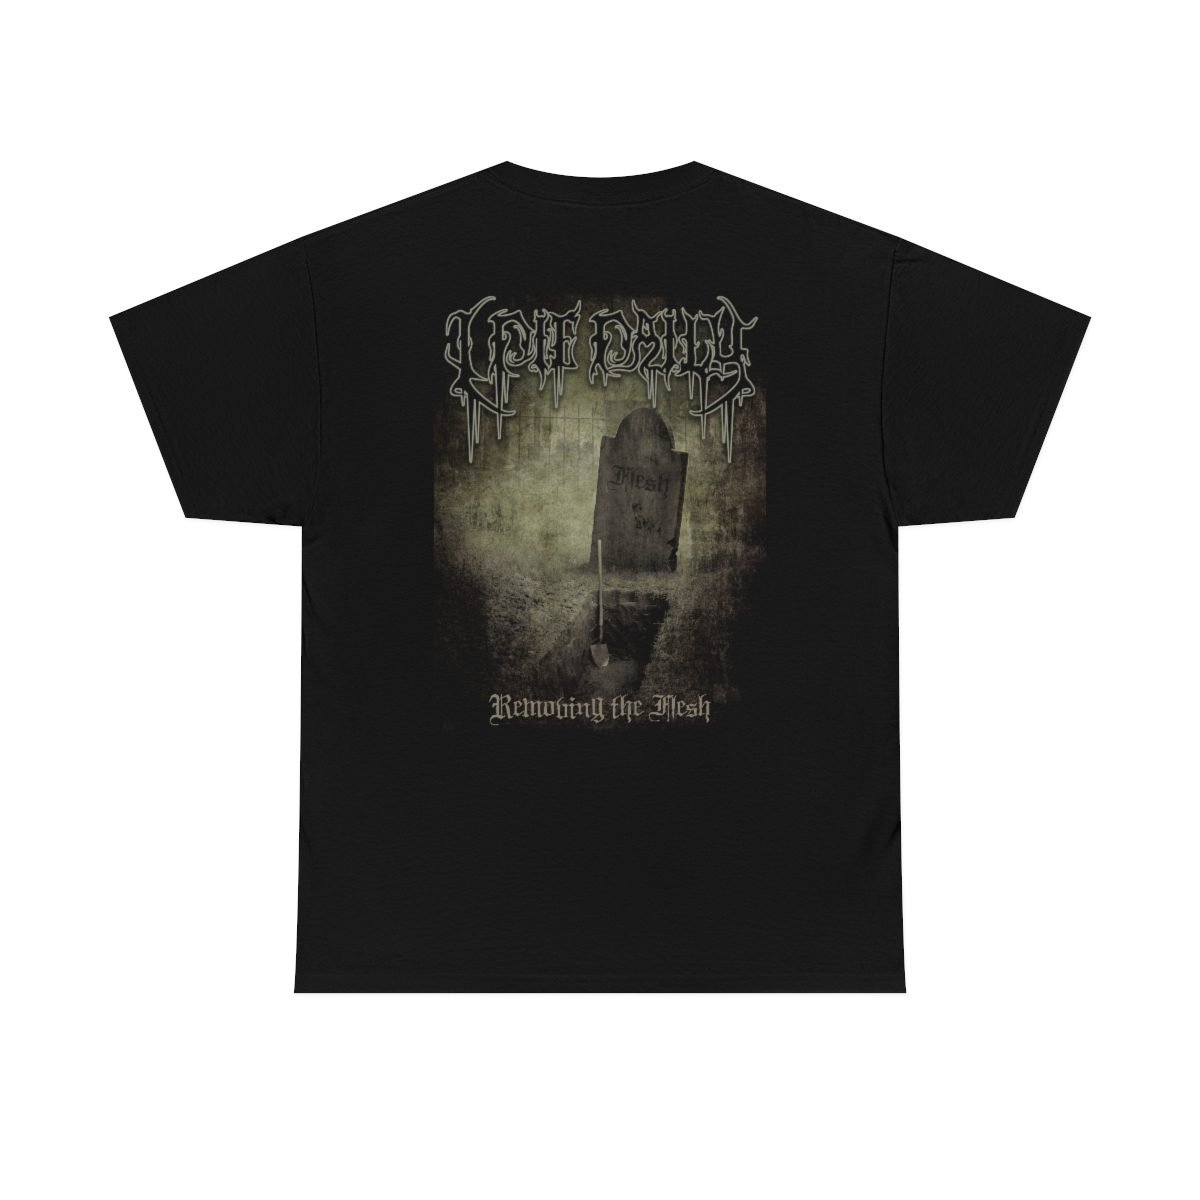 I Die Daily – Removing the Flesh 2 Sided Short Sleeve Tshirt (5000D)